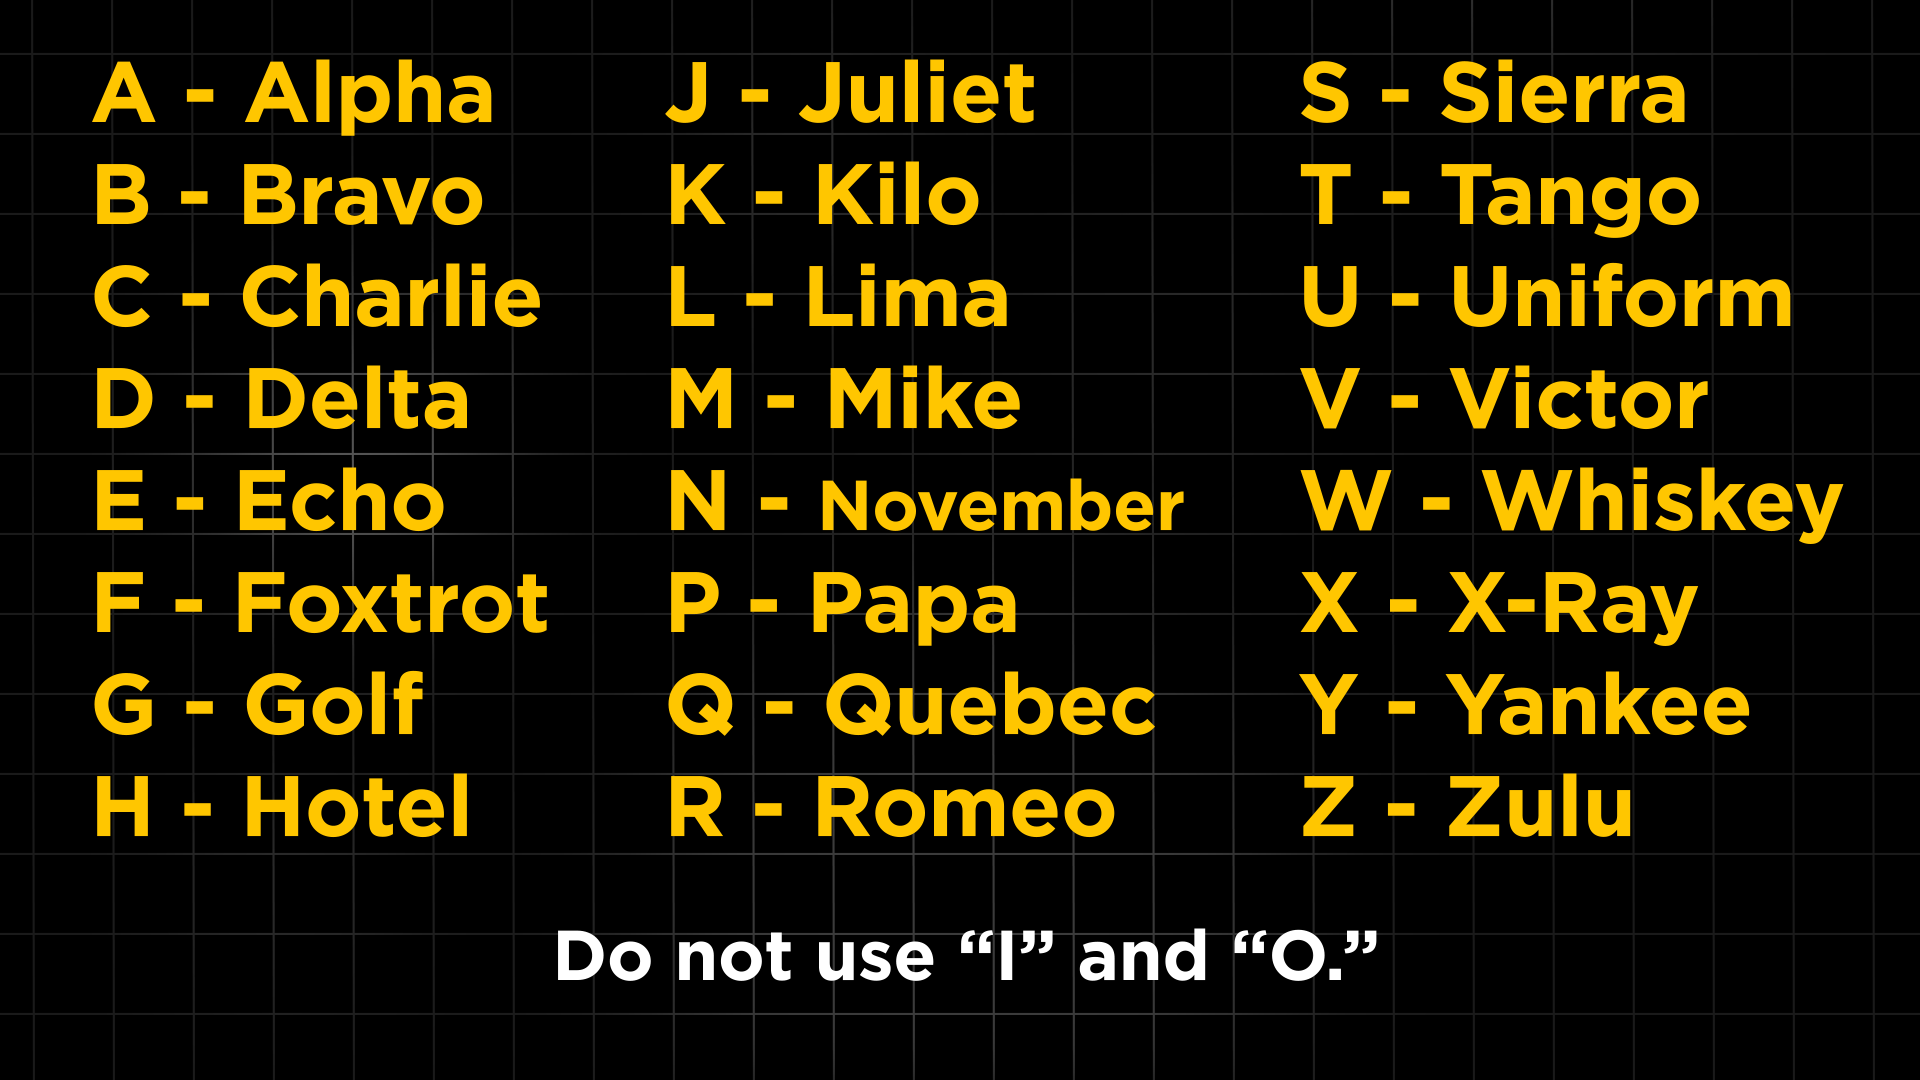 The phonetic alphabet for 2nd ACs